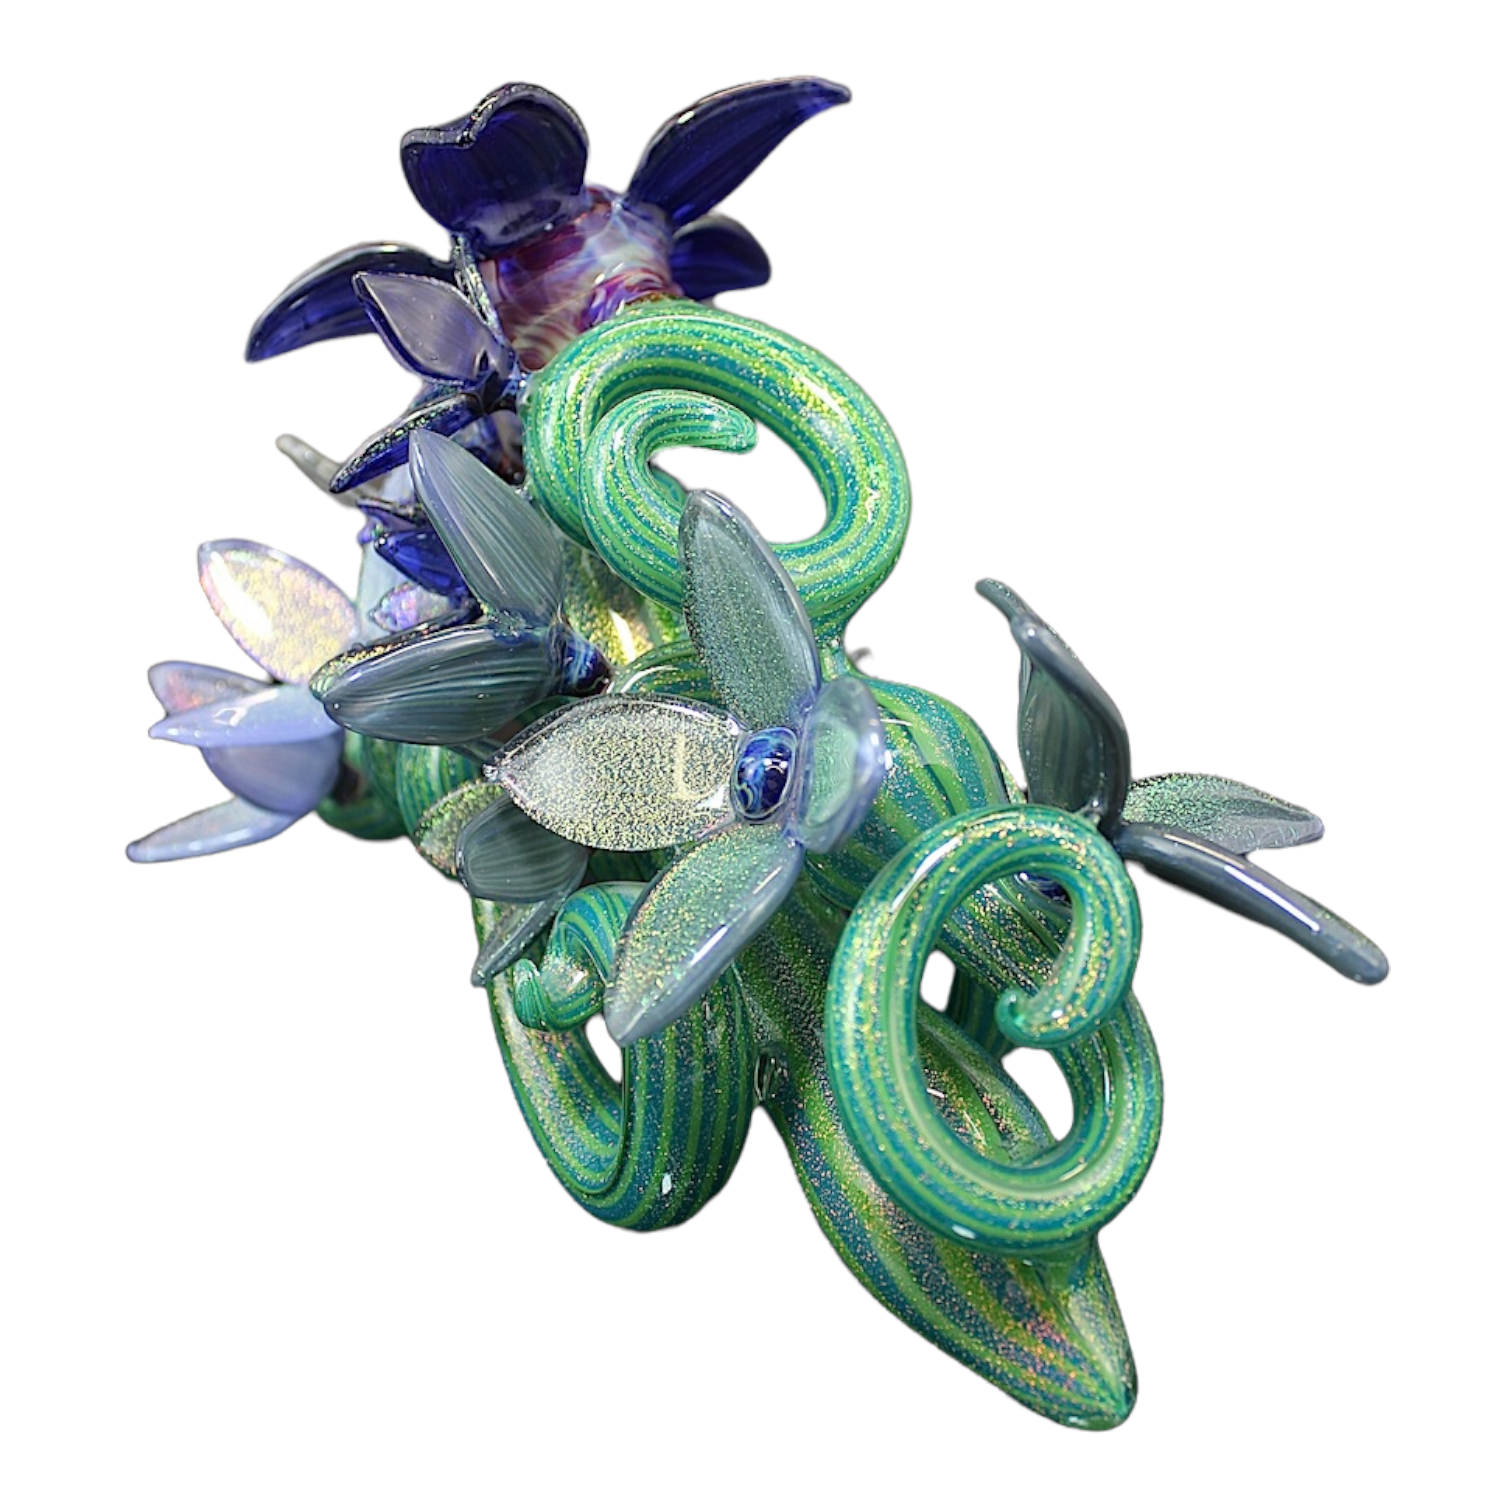 Darby Holm - The Death Flower- Cactus Dichro Butterfly Push Bubbler